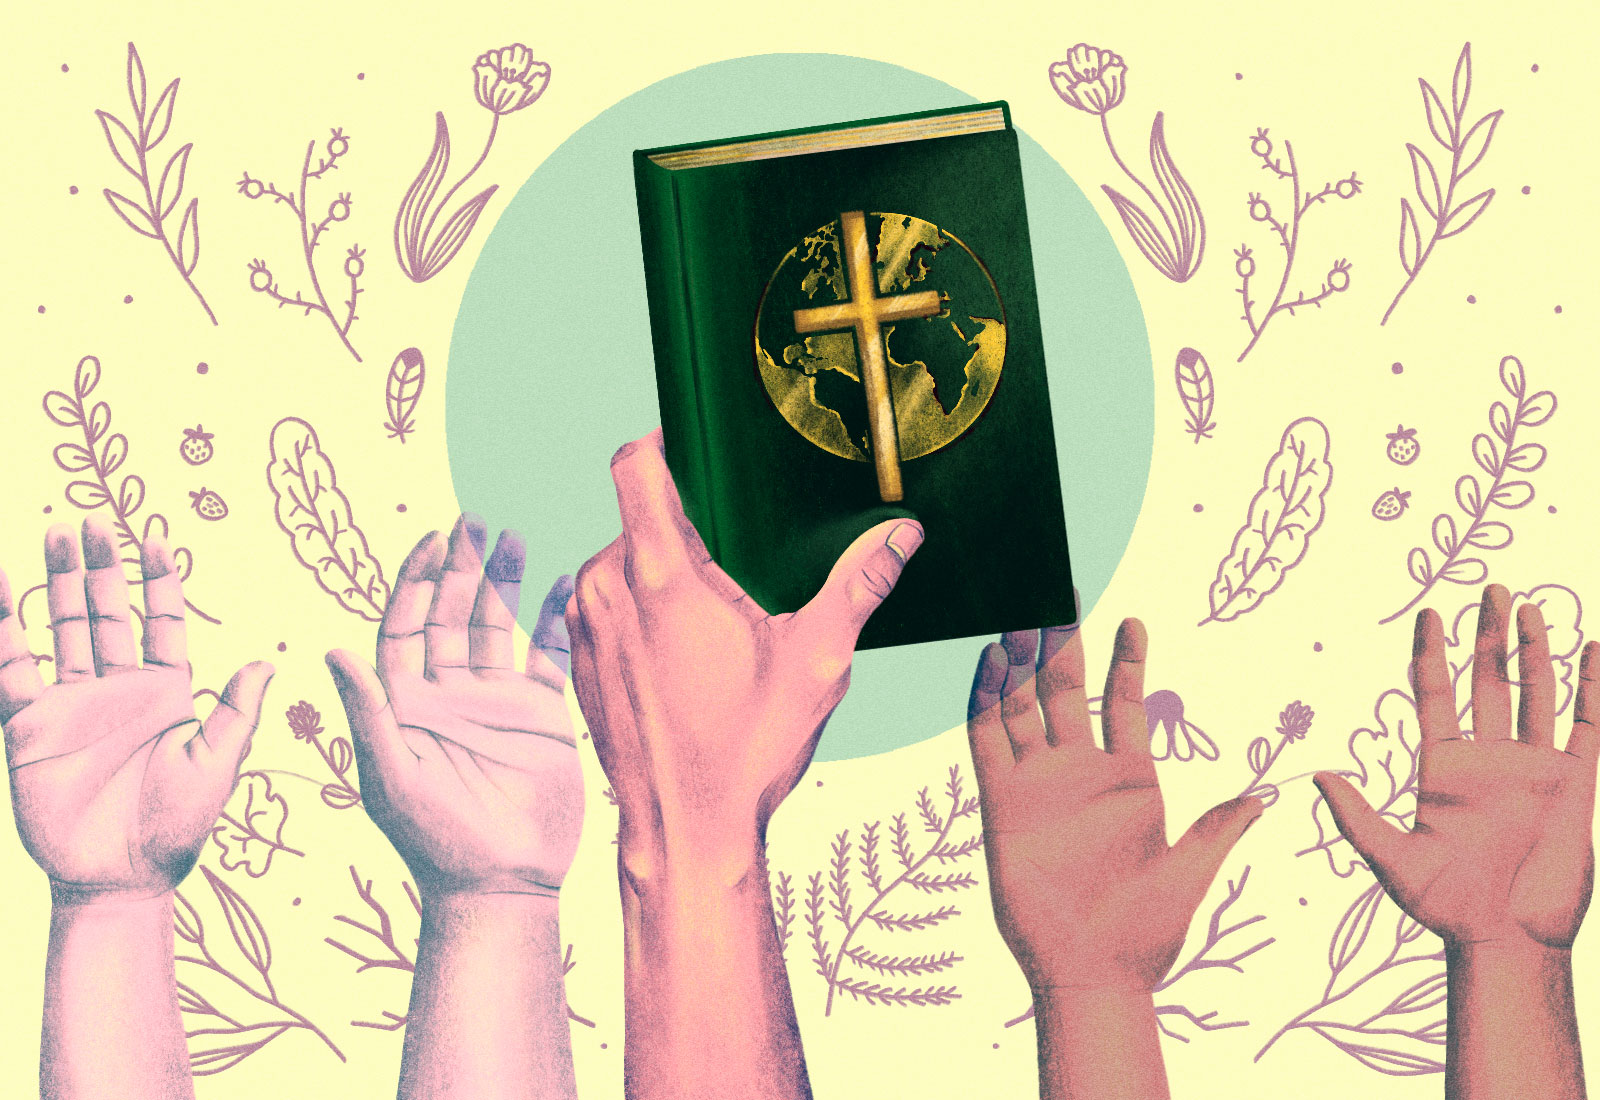 Illustration: Raised hands and a hand holding a bible with the Earth on it